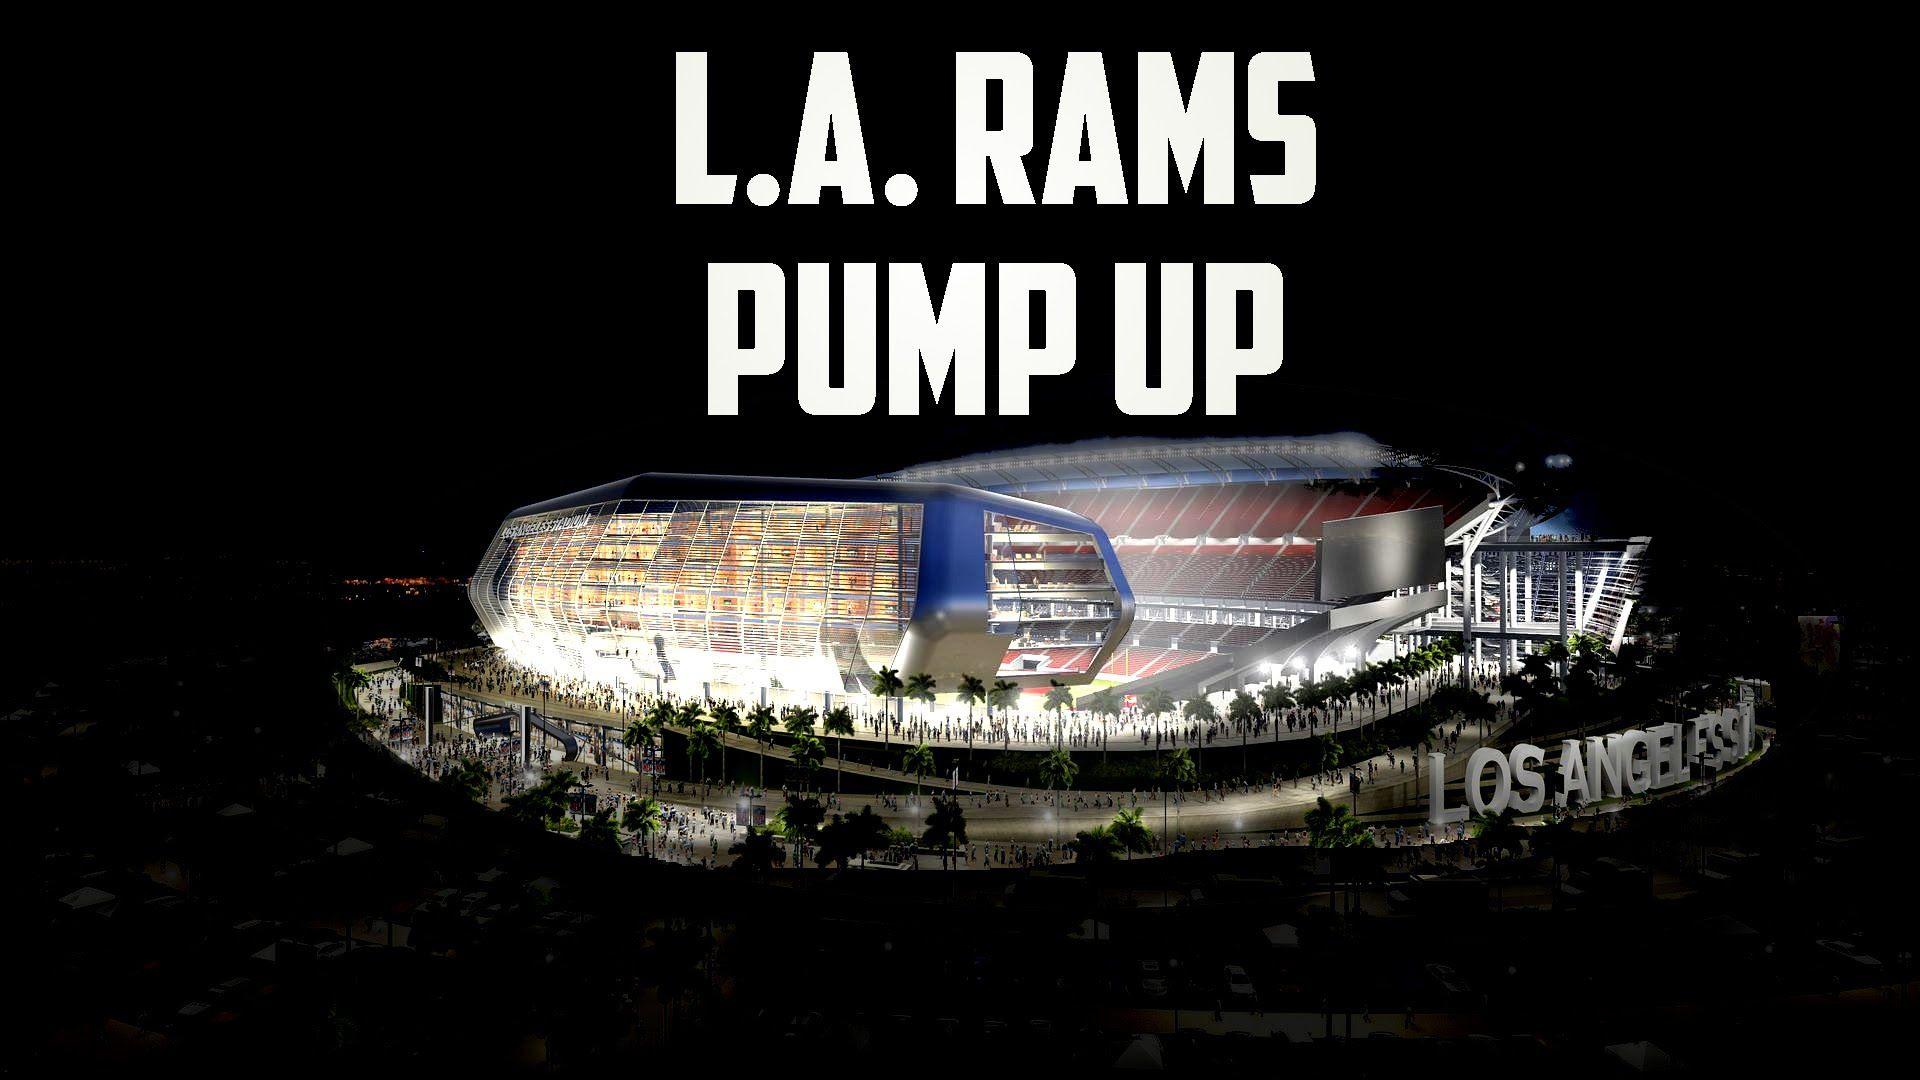 Los Angeles Rams Pump Up! Welcome Back